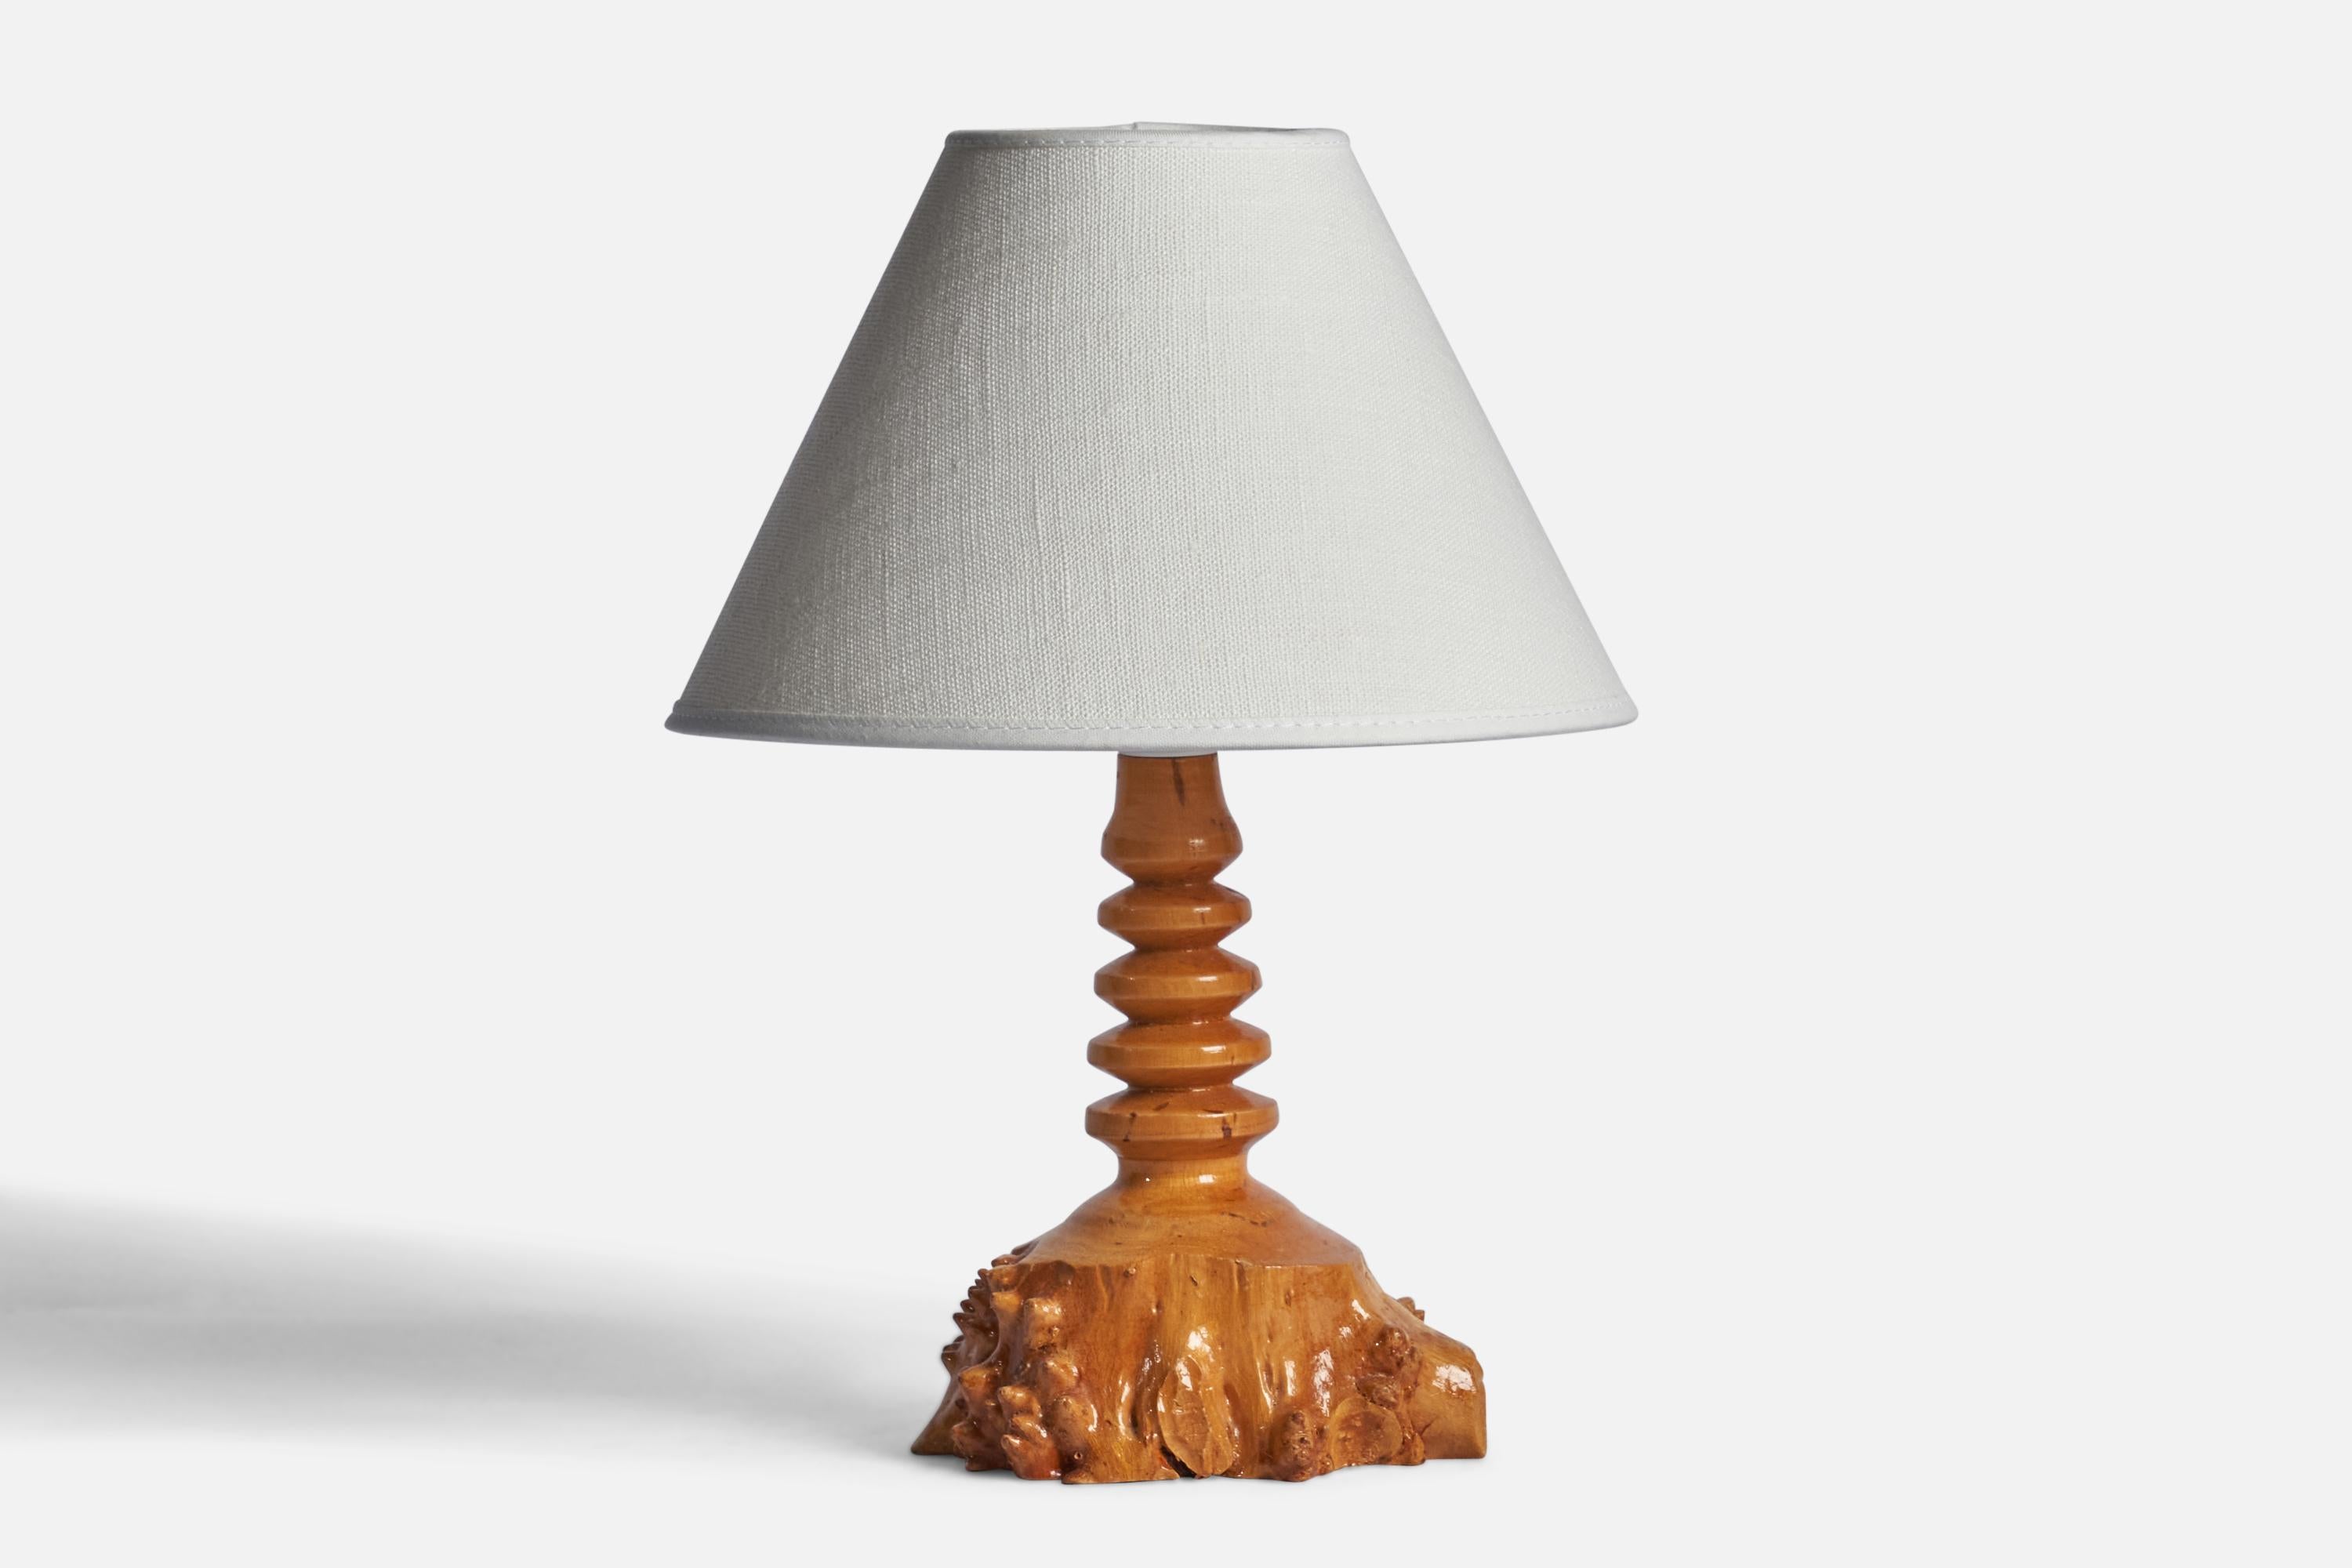 A freeform burl wood table lamp designed and produced in Sweden, 1960s.

Dimensions of Lamp (inches): 8” H x 4.85” Diameter
Dimensions of Shade (inches): 3” Top Diameter x 8” Bottom Diameter x 5” H 
Dimensions of Lamp with Shade (inches): 11” H x 8”